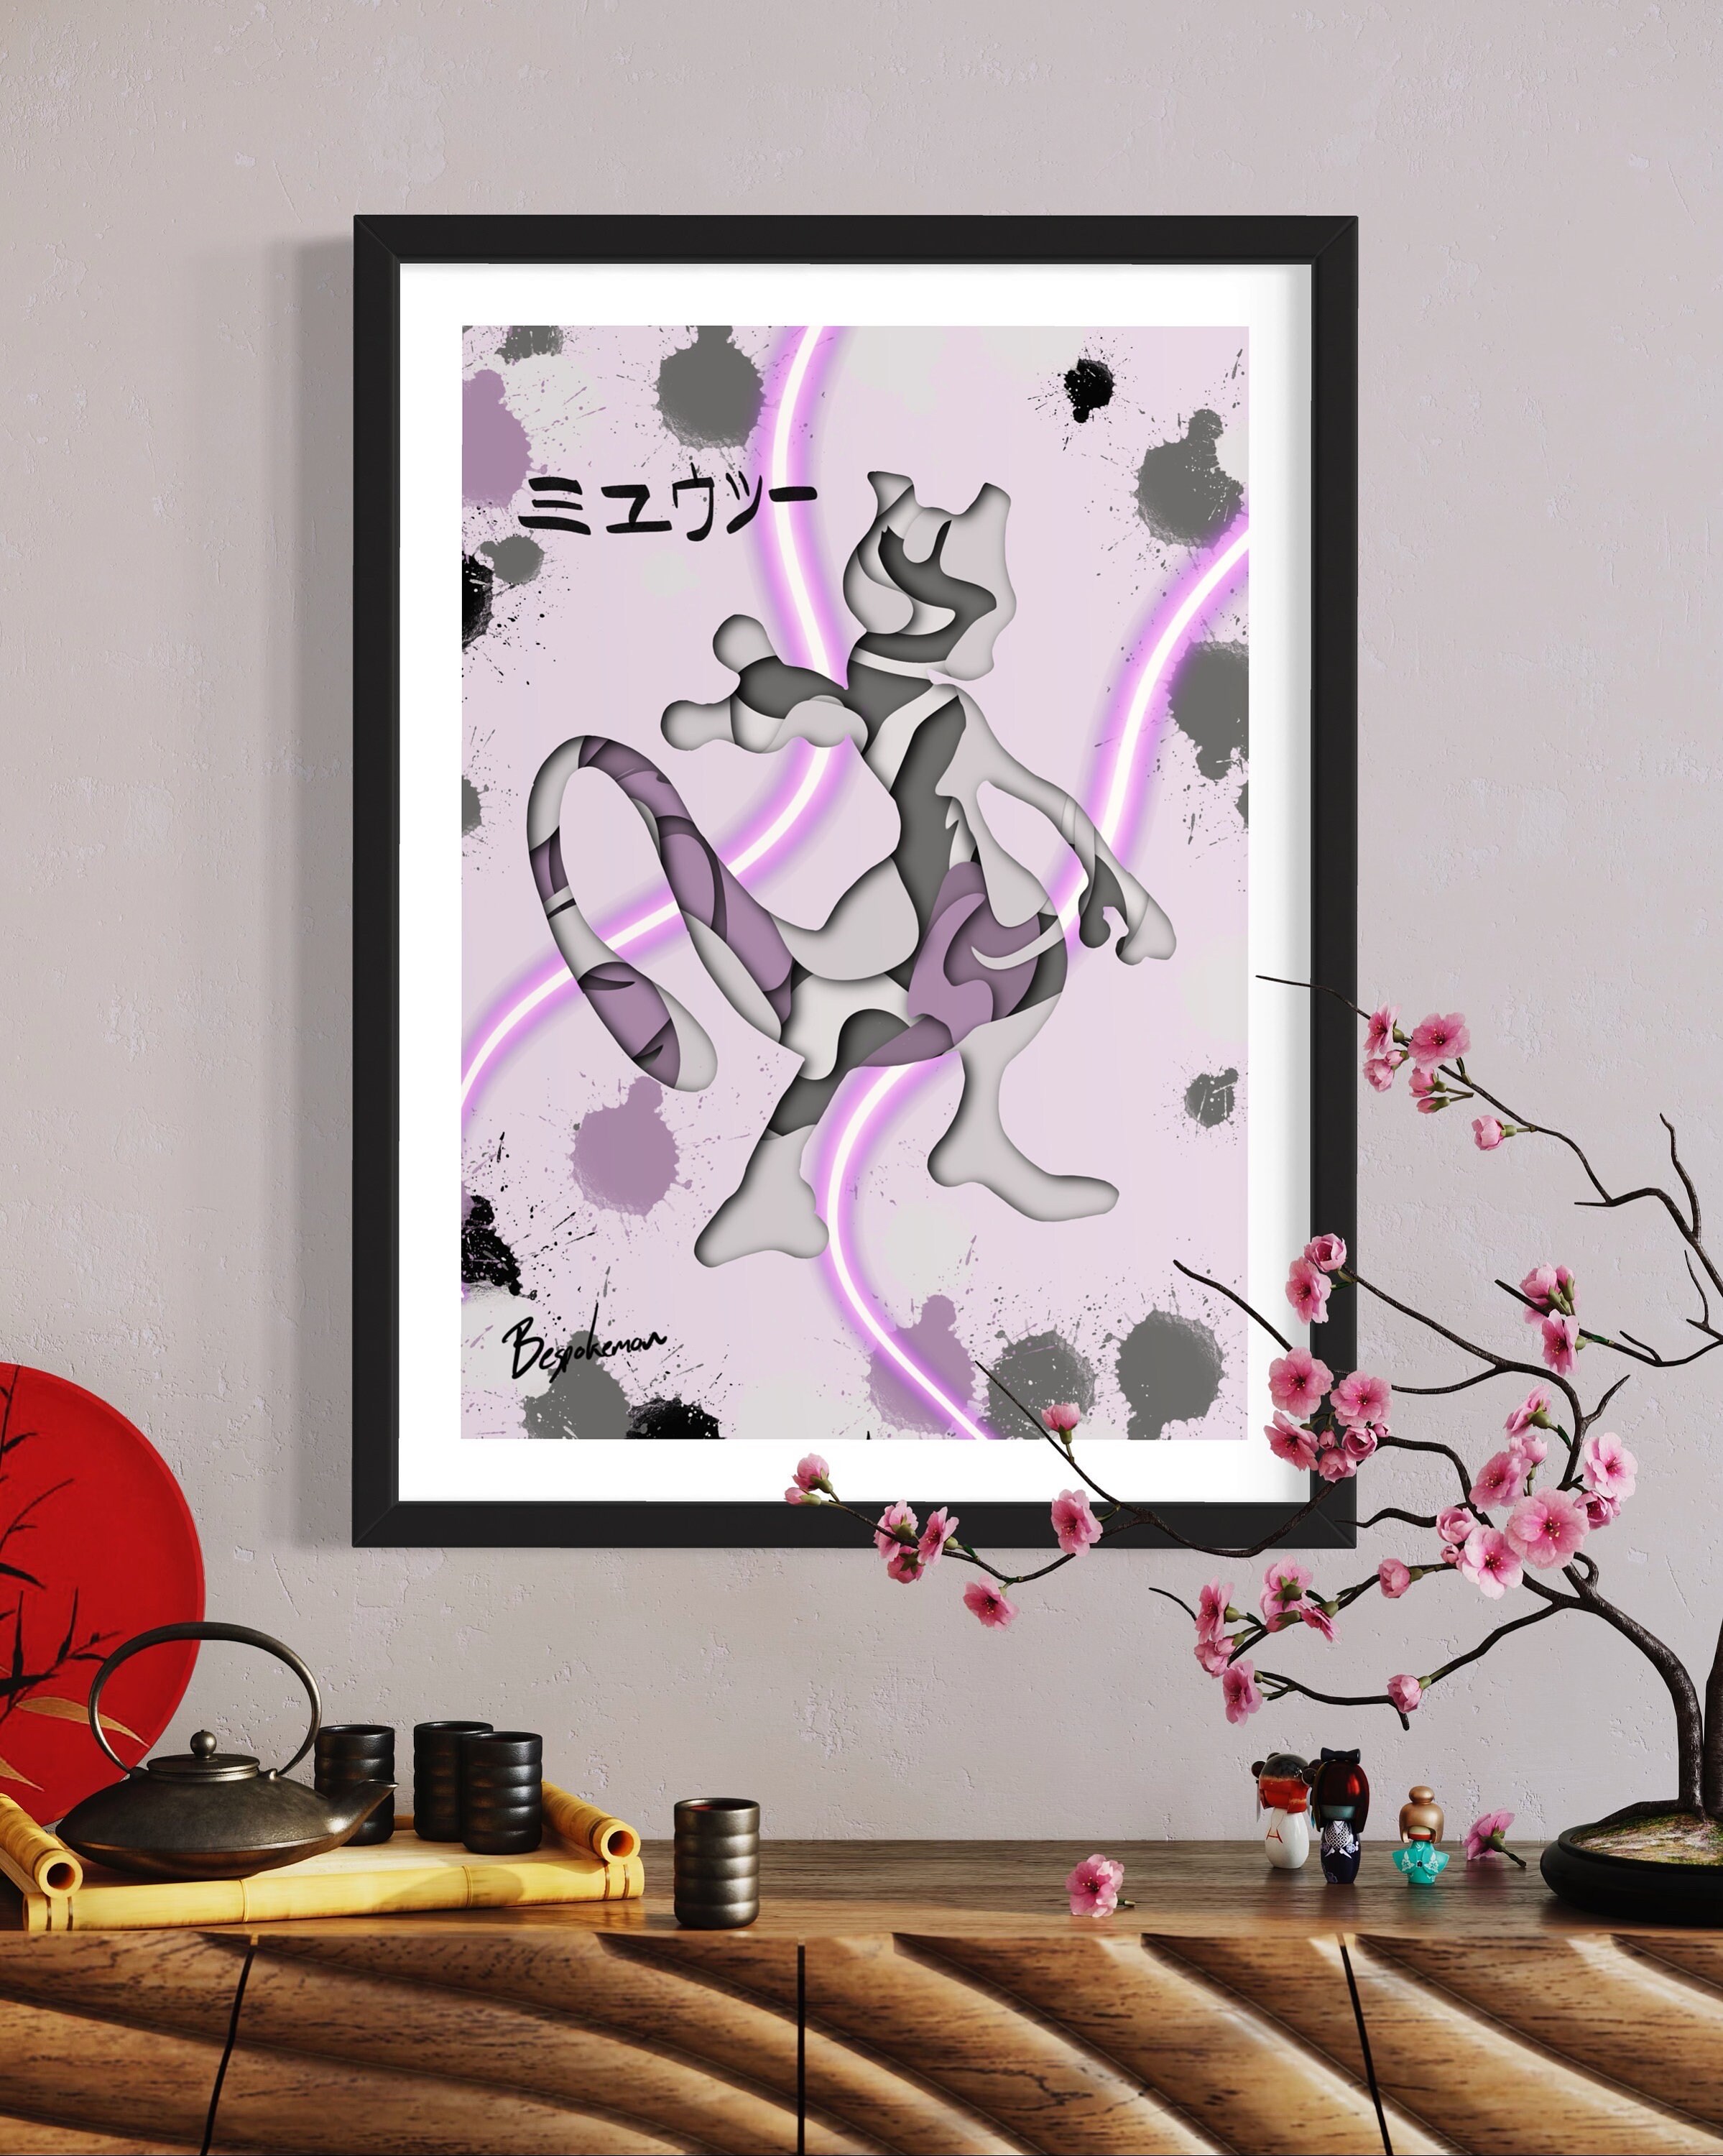 Mewtwo Pokemon 2019 MOVIE Art Wall Indoor Room Outdoor Poster - POSTER 20x30